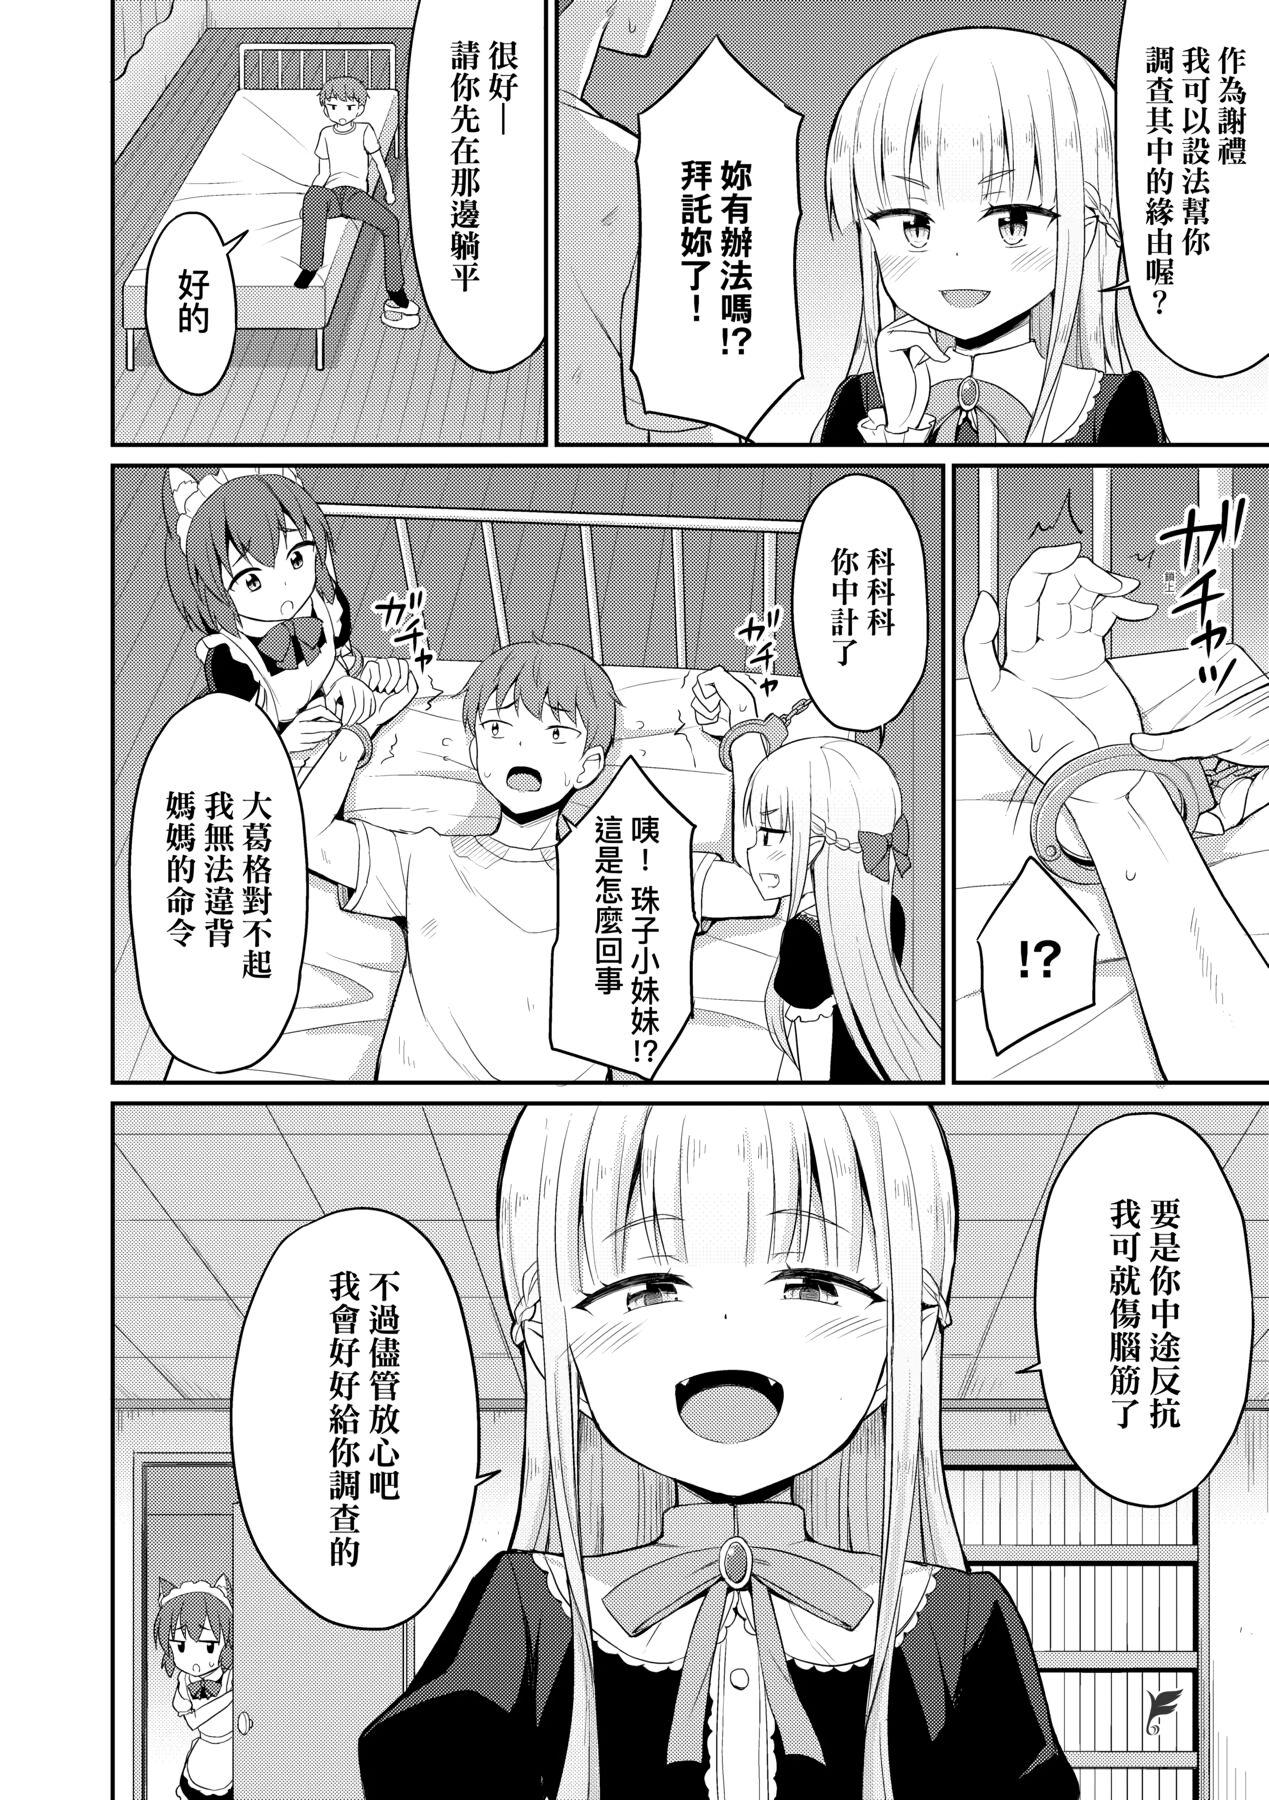 Sex Tape Cafe Eternal e Youkoso! | 歡迎光臨咖啡永遠娘! Unshaved - Page 11